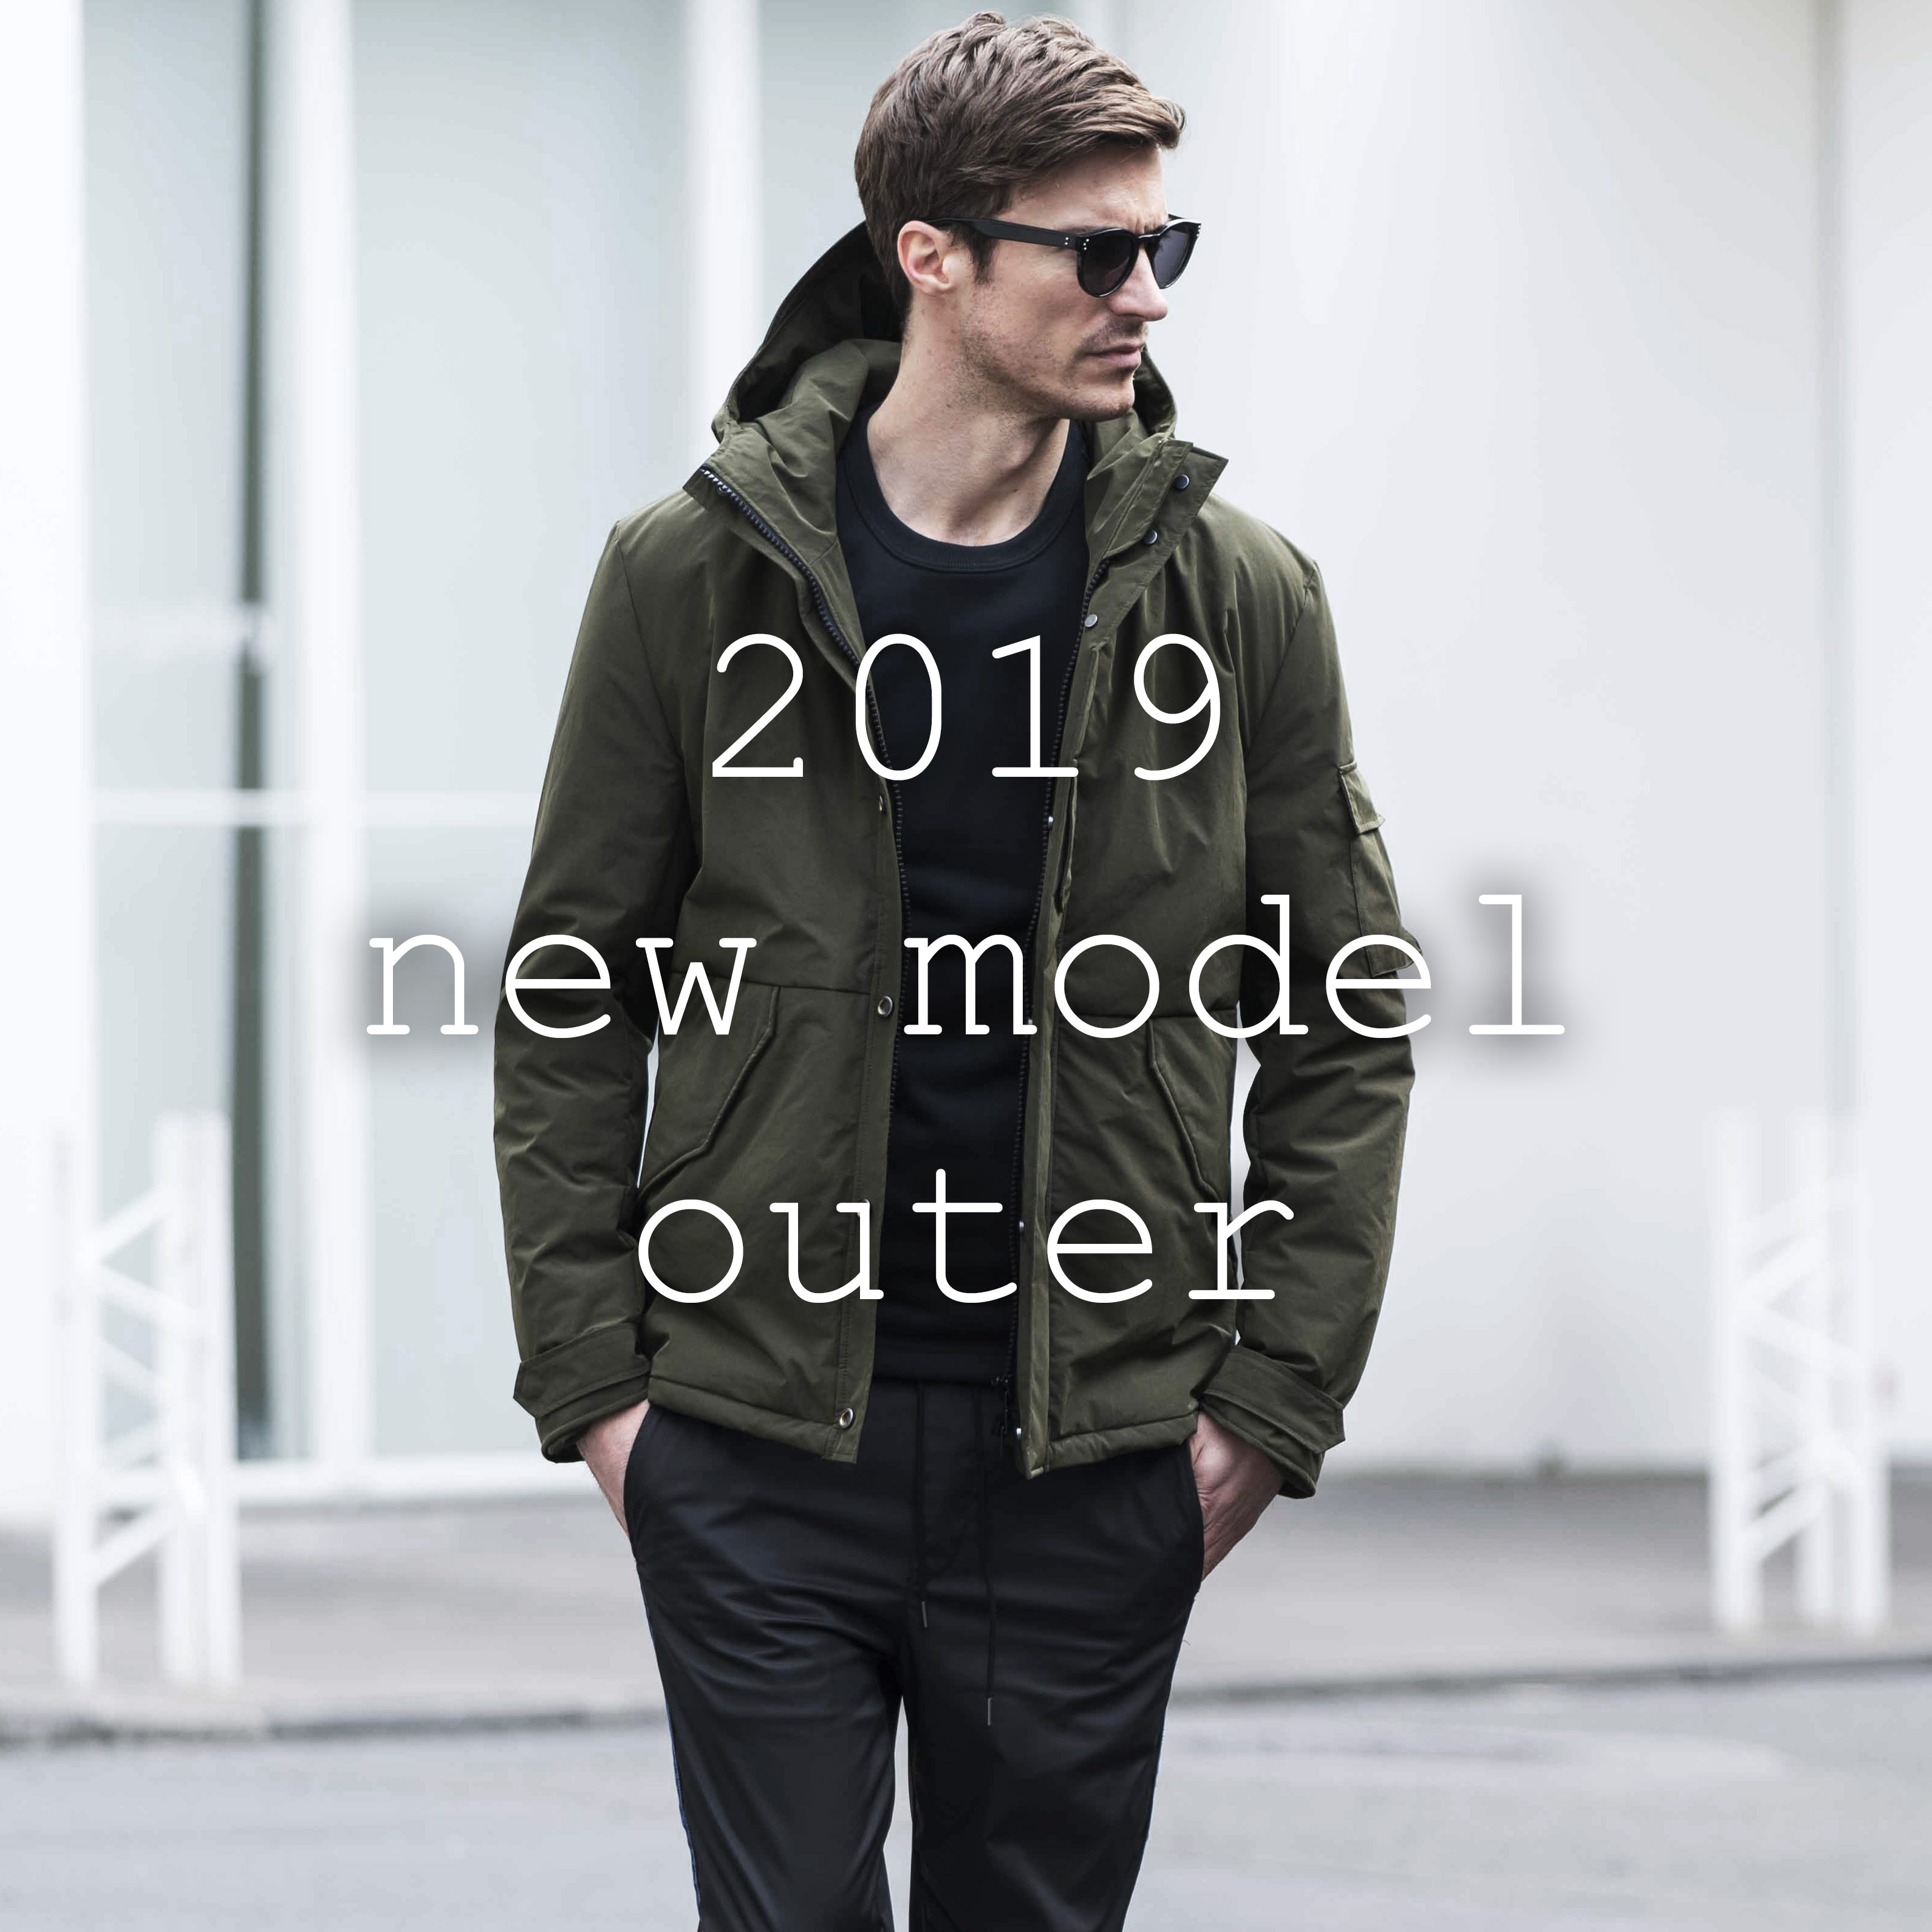 2019 new model outer | feature | wjk online store